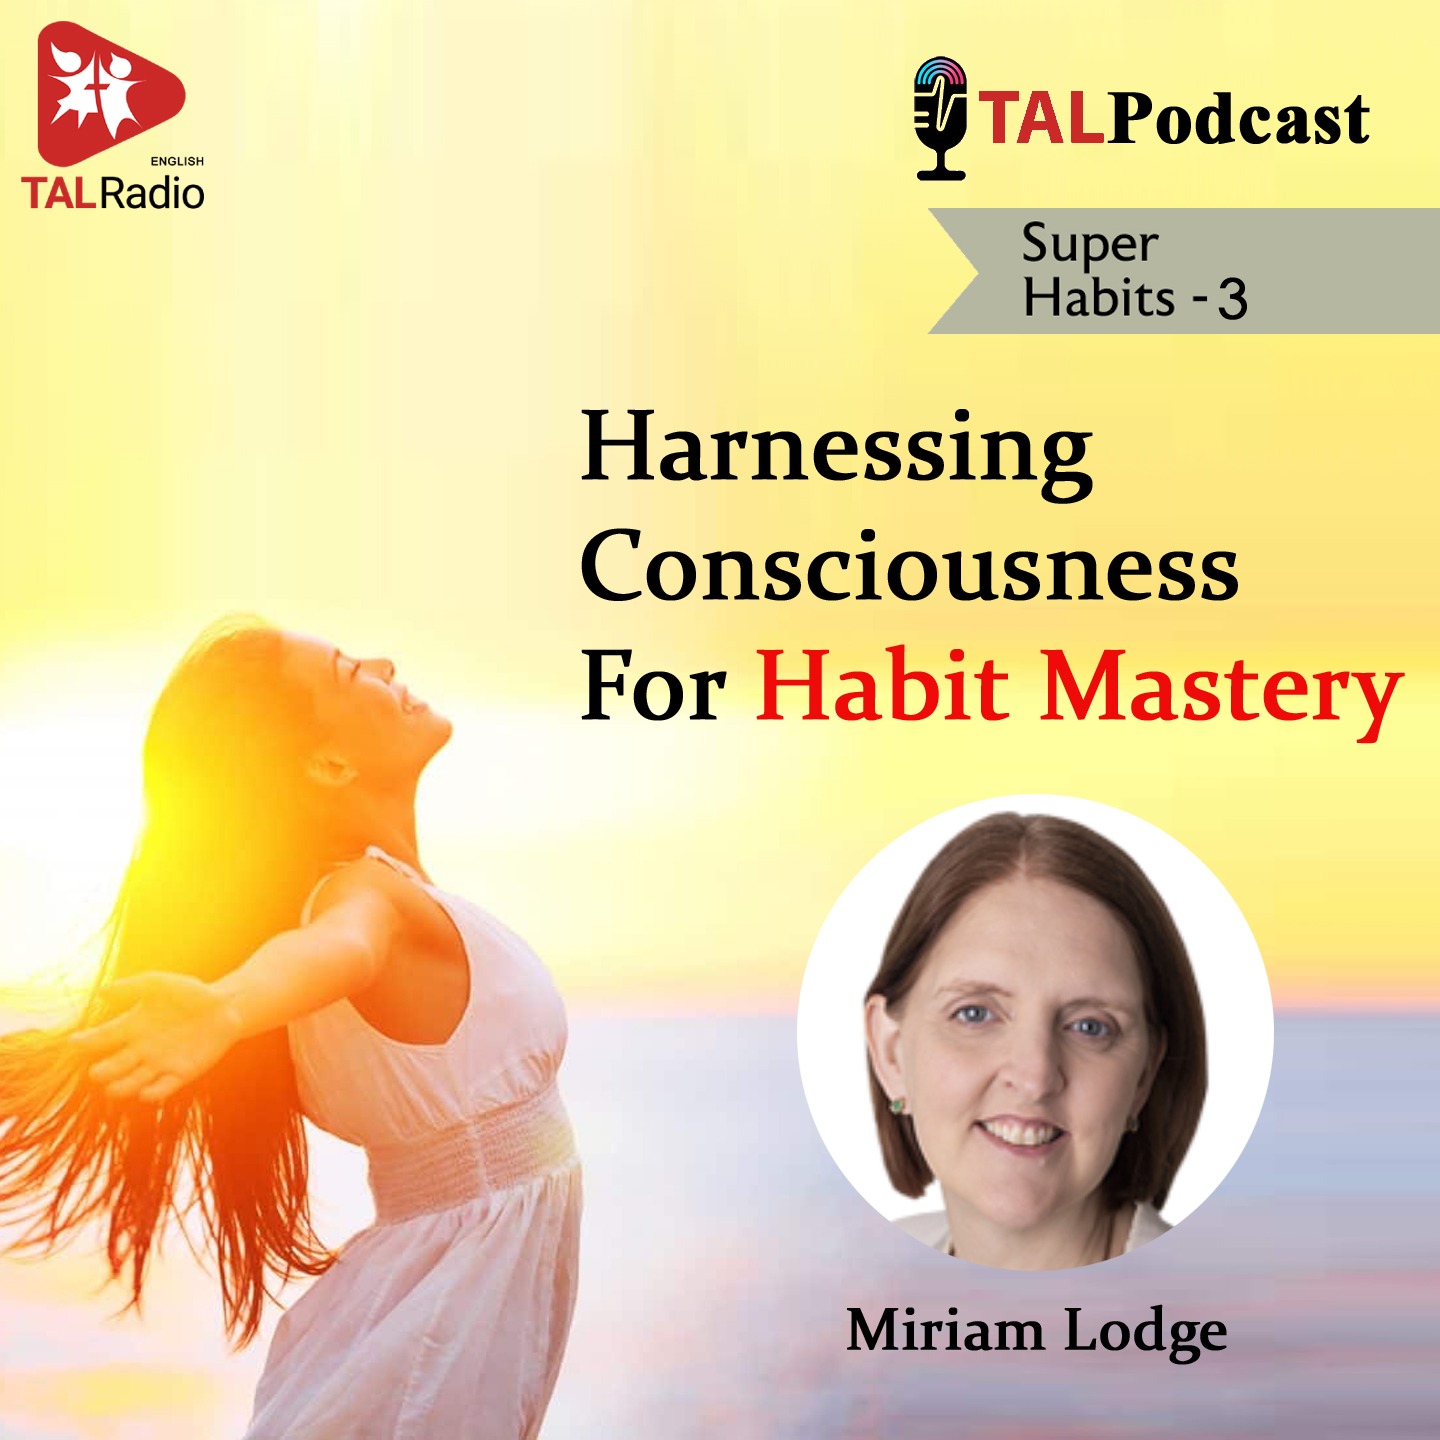 Harnessing Conciousness For Habit Mastery | Super Habits - 3